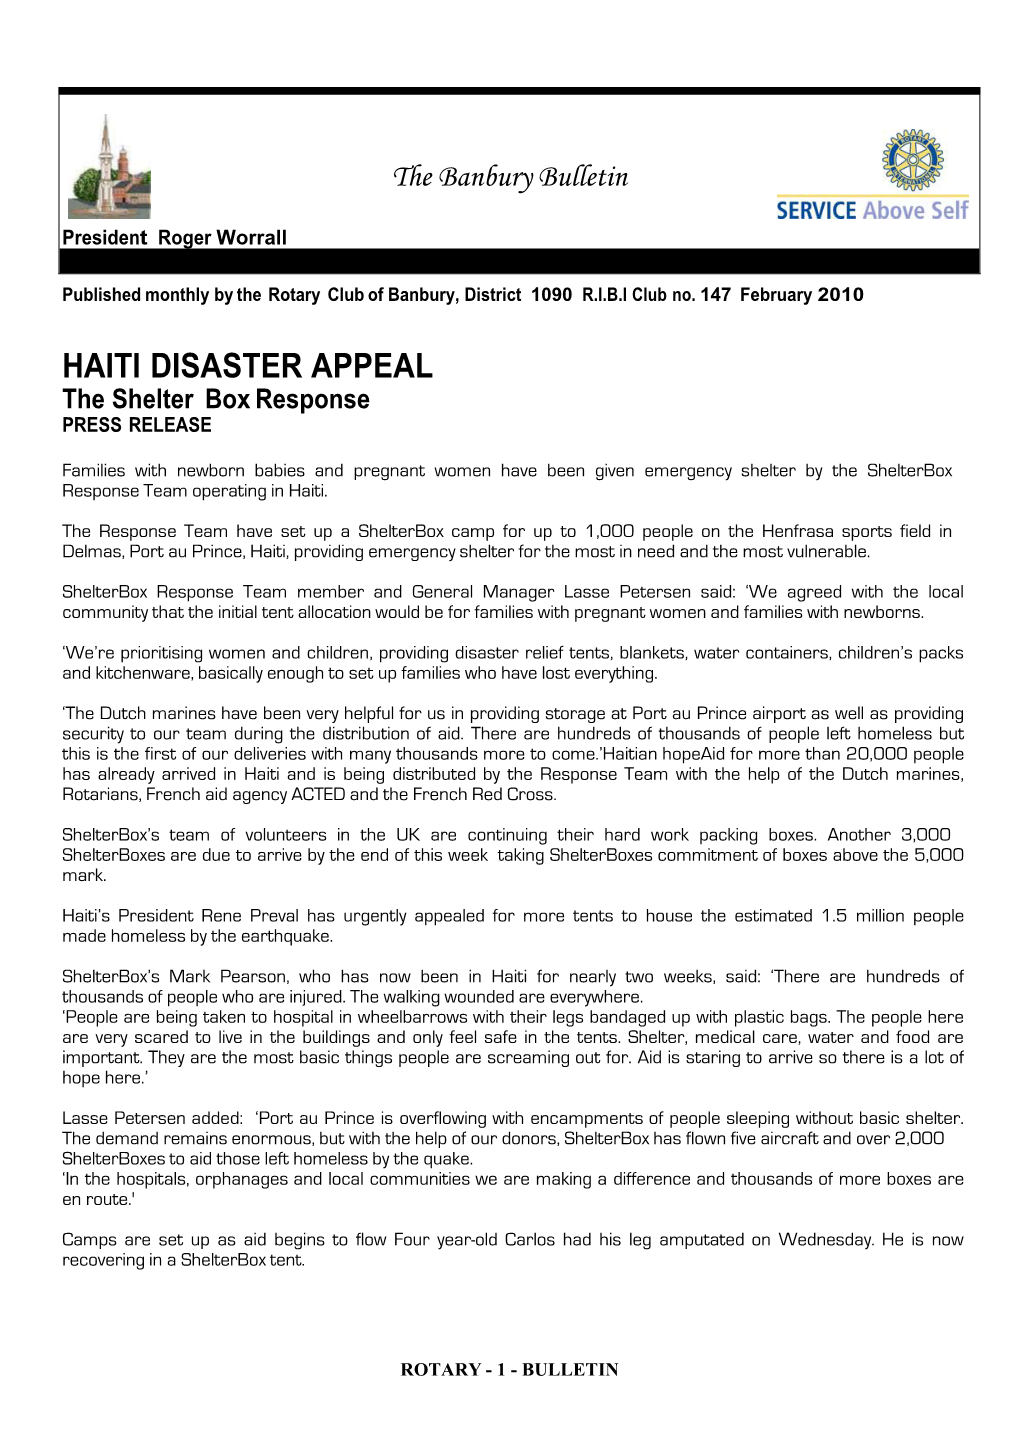 HAITI DISASTER APPEAL the Shelter Box Response PRESS RELEASE